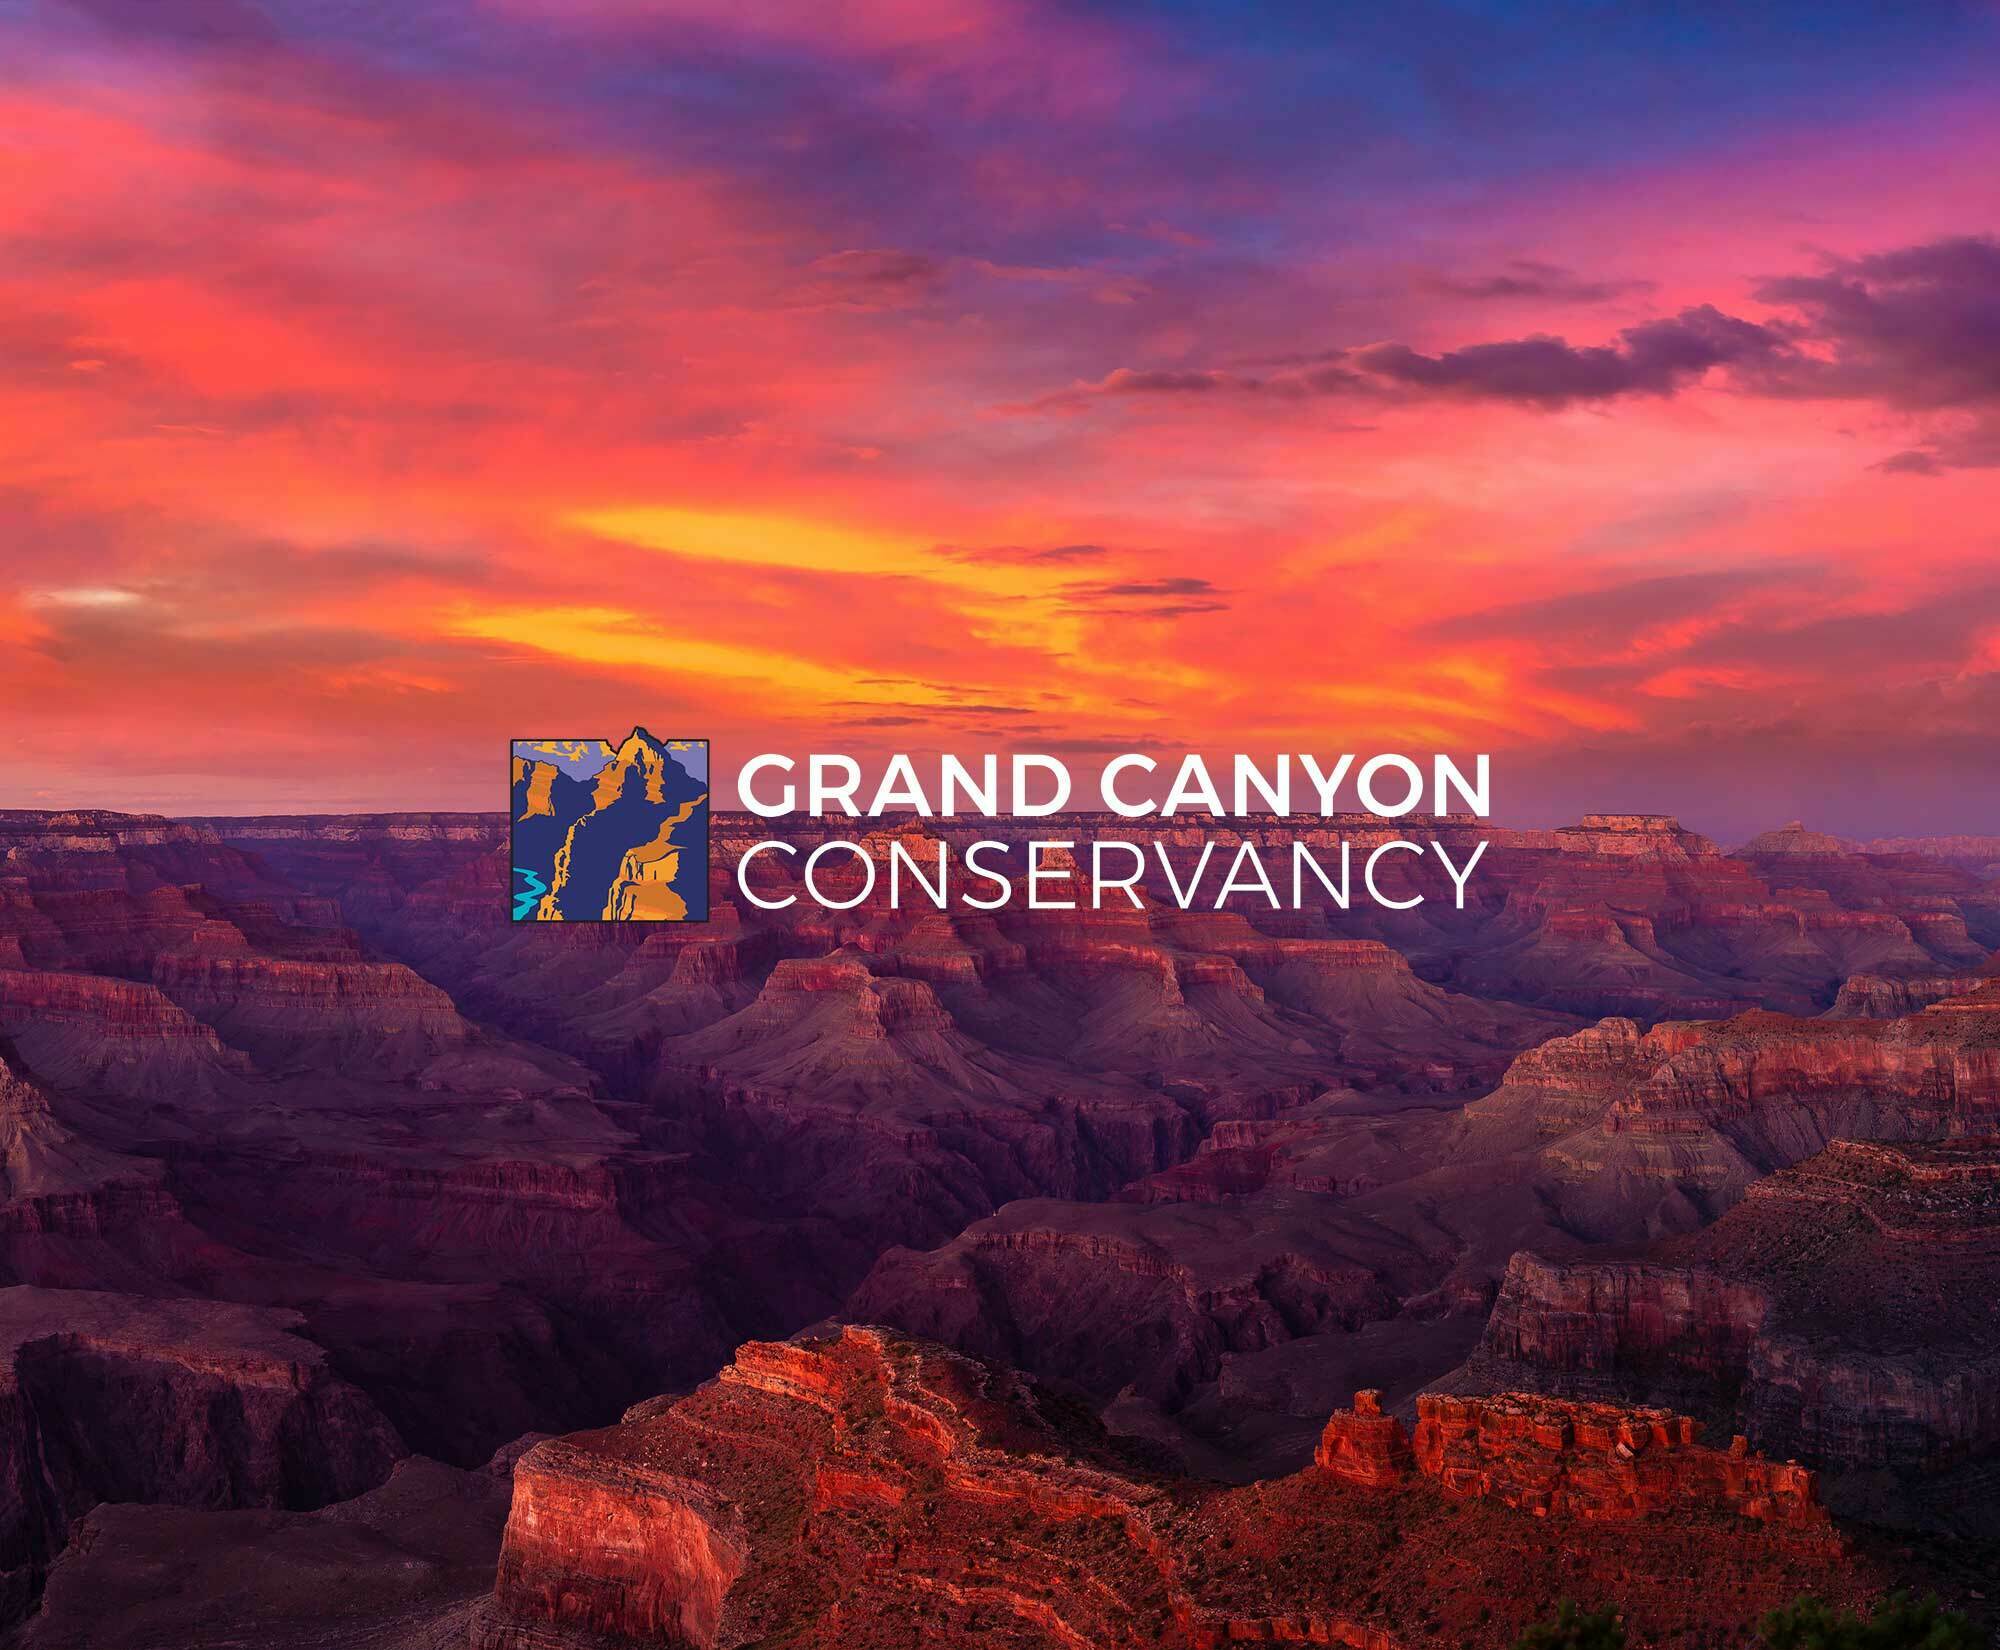 Grand Canyon Conservancy Logo with Grand Canyon Scenic Imagery